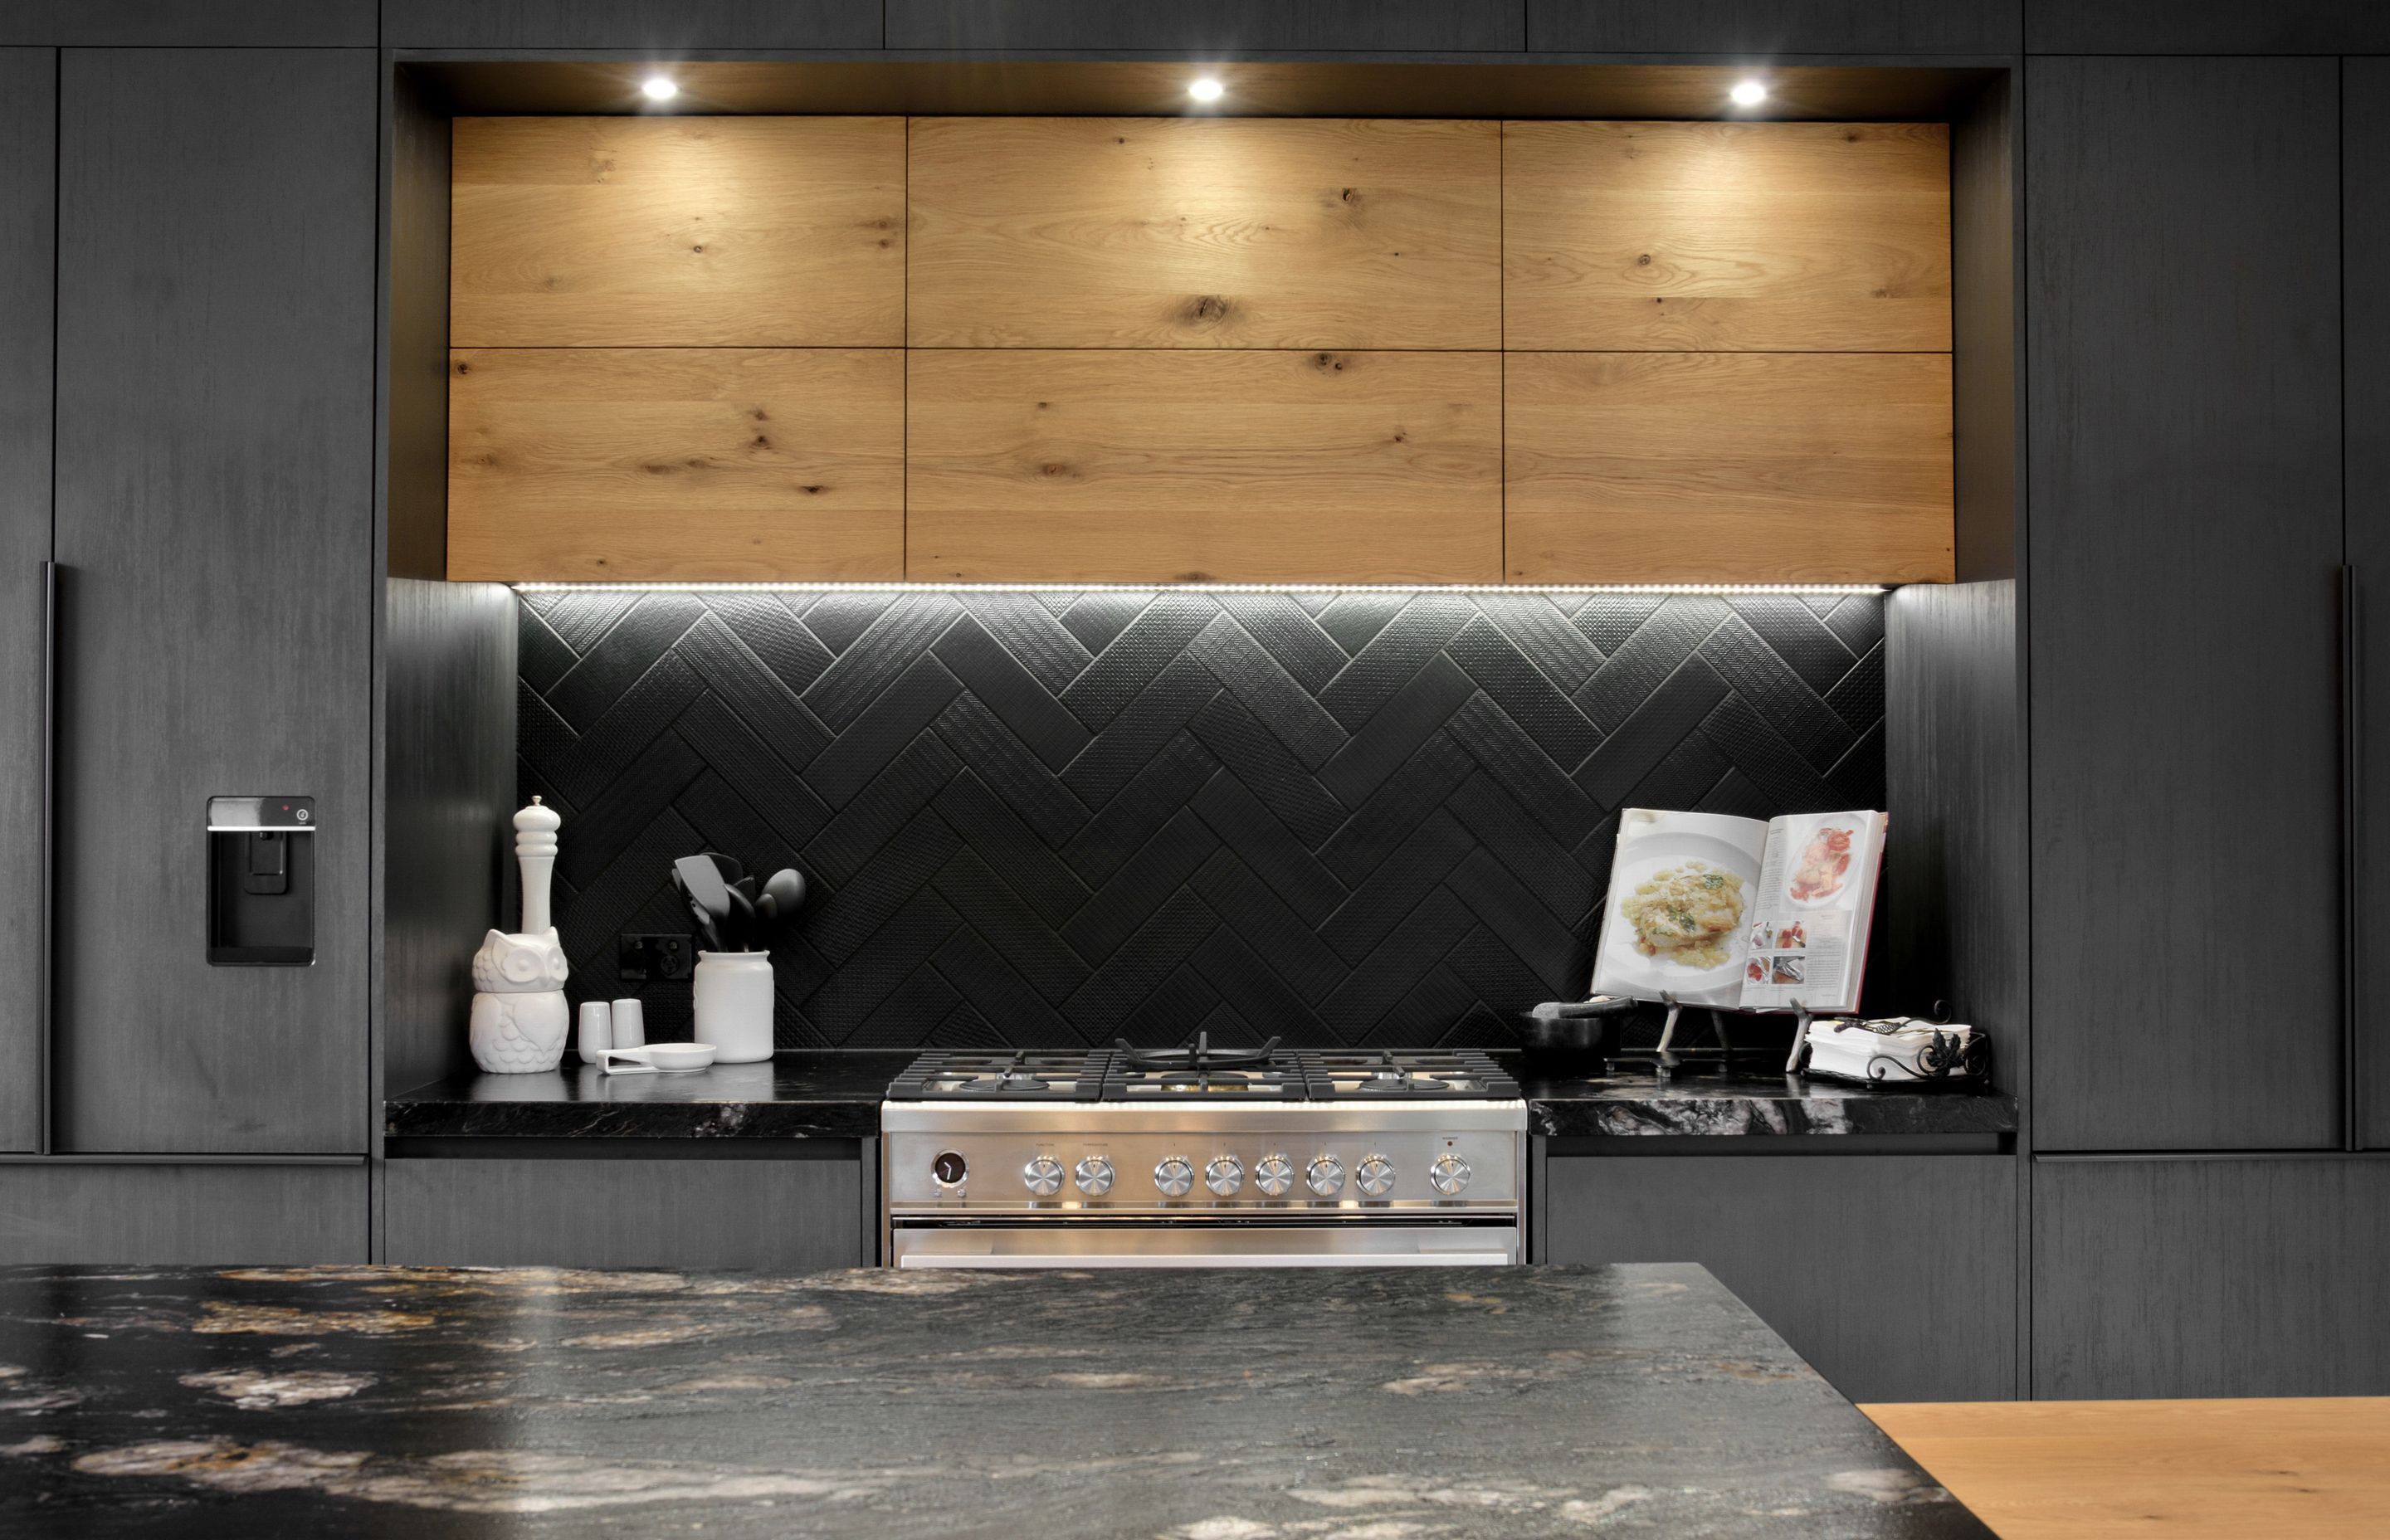 The gorgeous granite and herringbone tiles of the kitchen create a feature splashback.